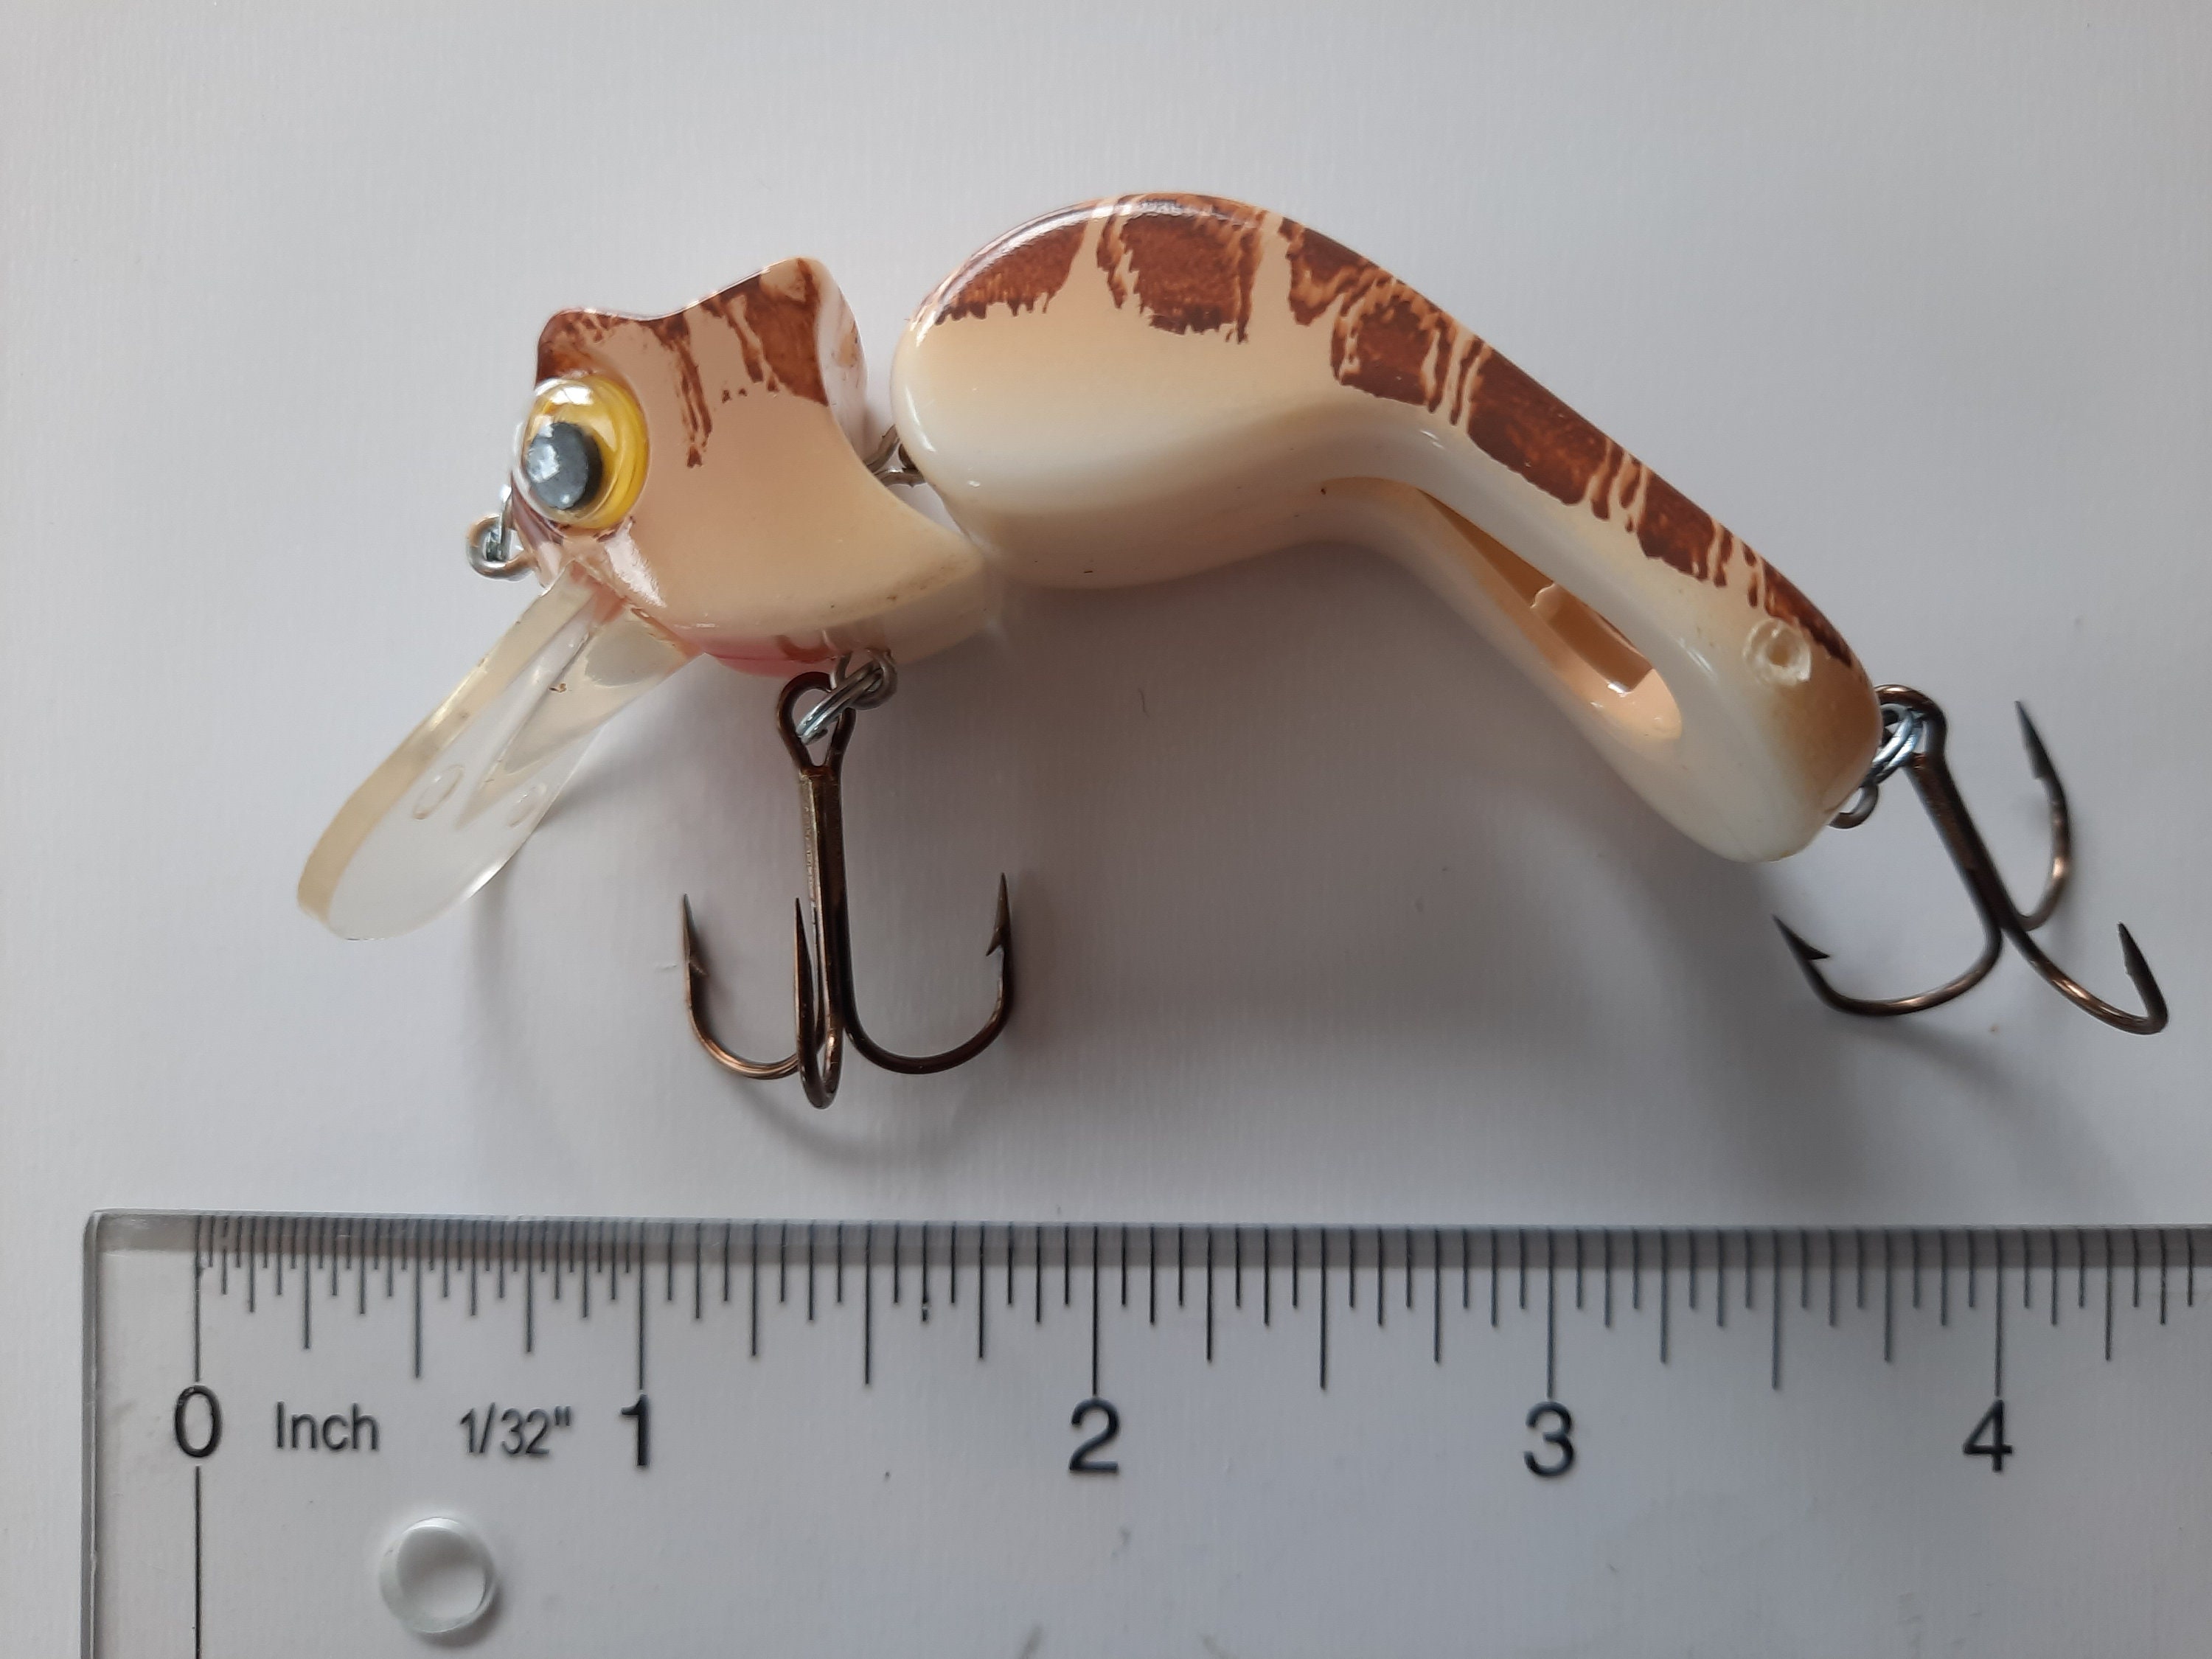 Buy Vintage 1990s Crankbait Fishing Lure: Renosky Cranking Guido, Natural  Brown Spotted Frog 3/8 Oz., 3.5, Unfished in Display Container Rare Online  in India 